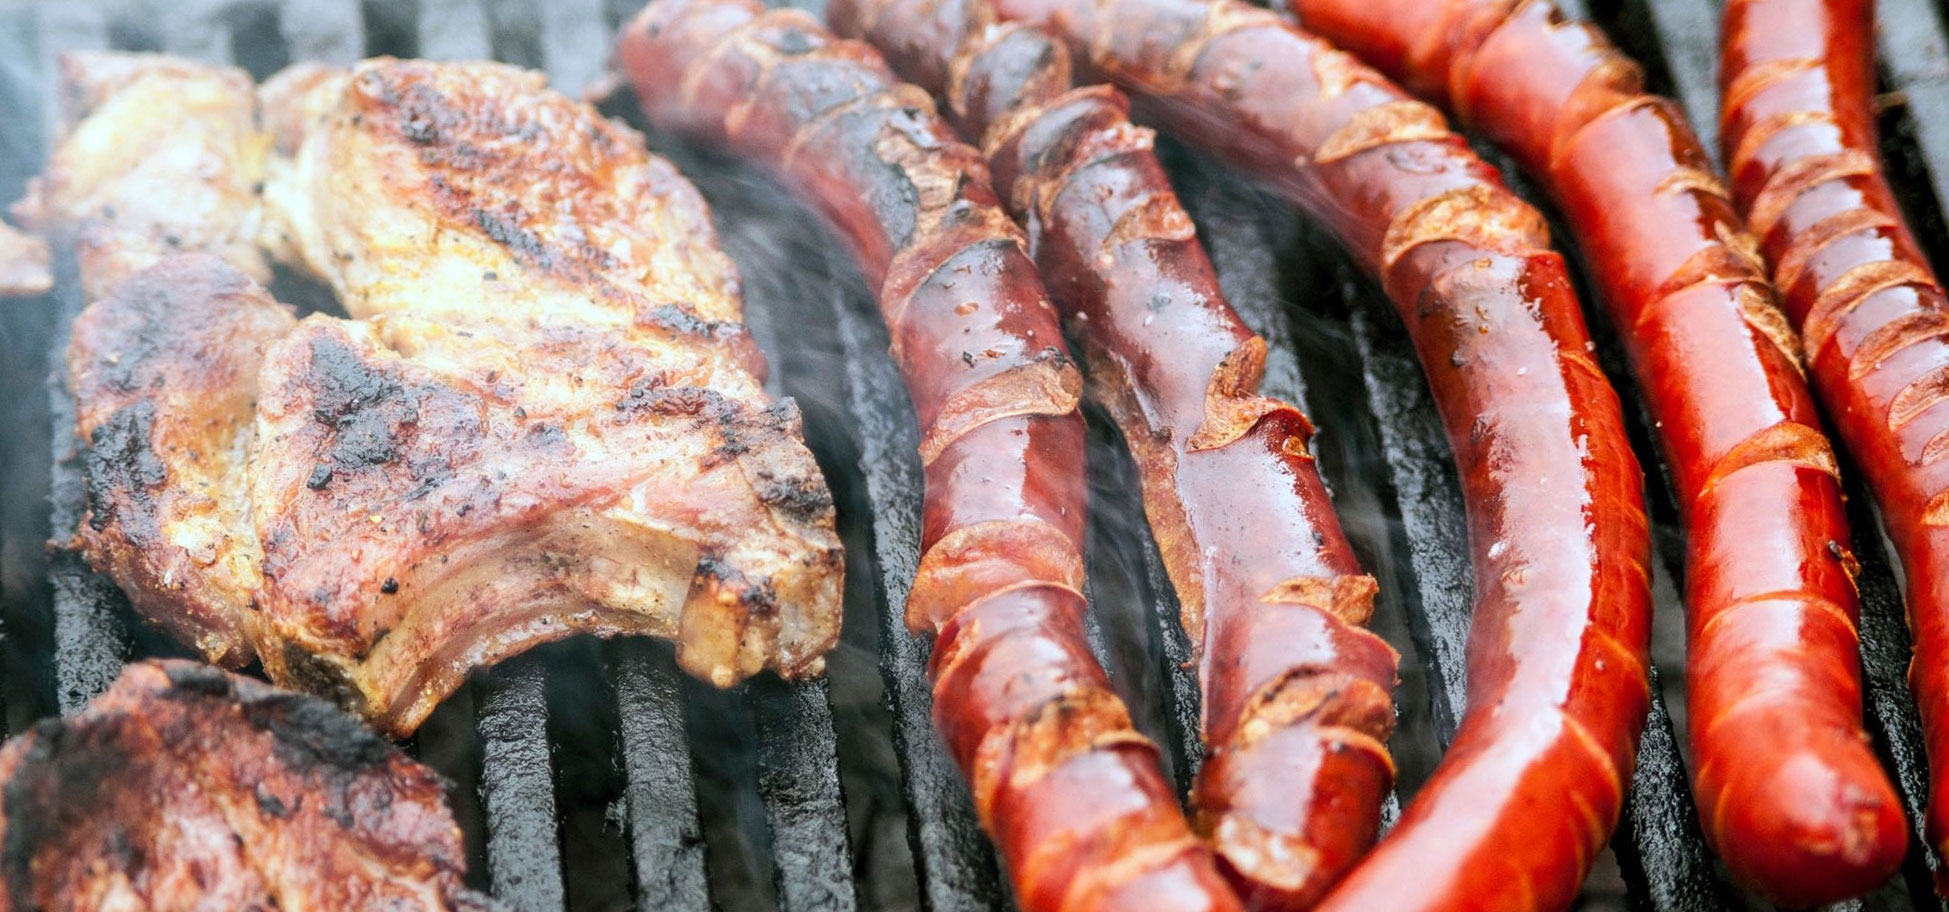 A grill with meat and sausage on it.